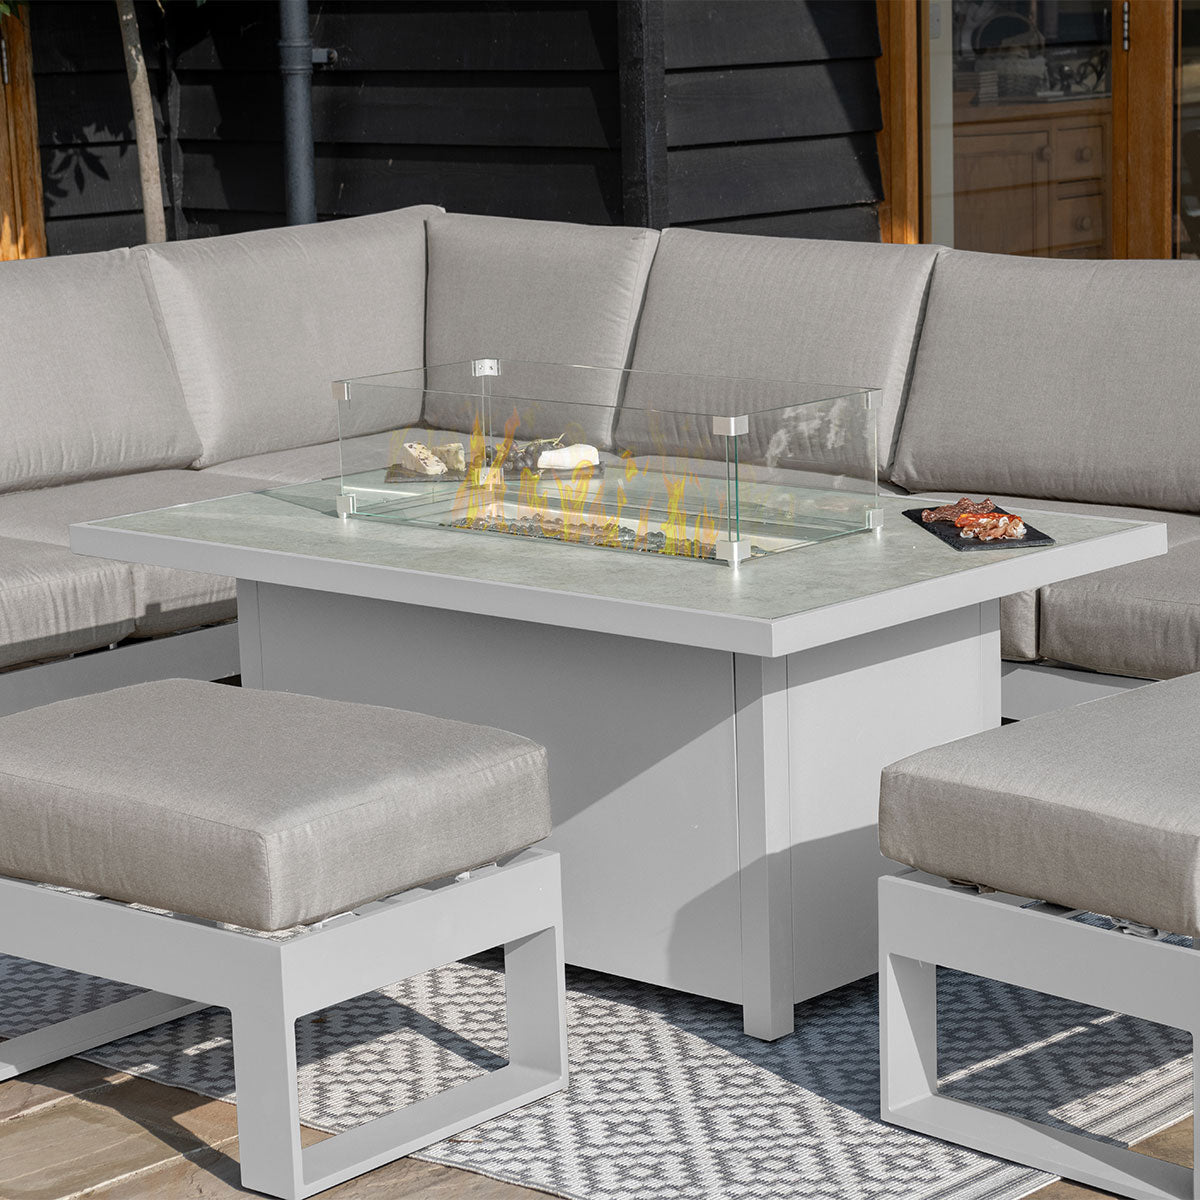 Aluminium Large Corner Dining with Rectangular Fire Pit Table (includes 2x footstools) #colour_white